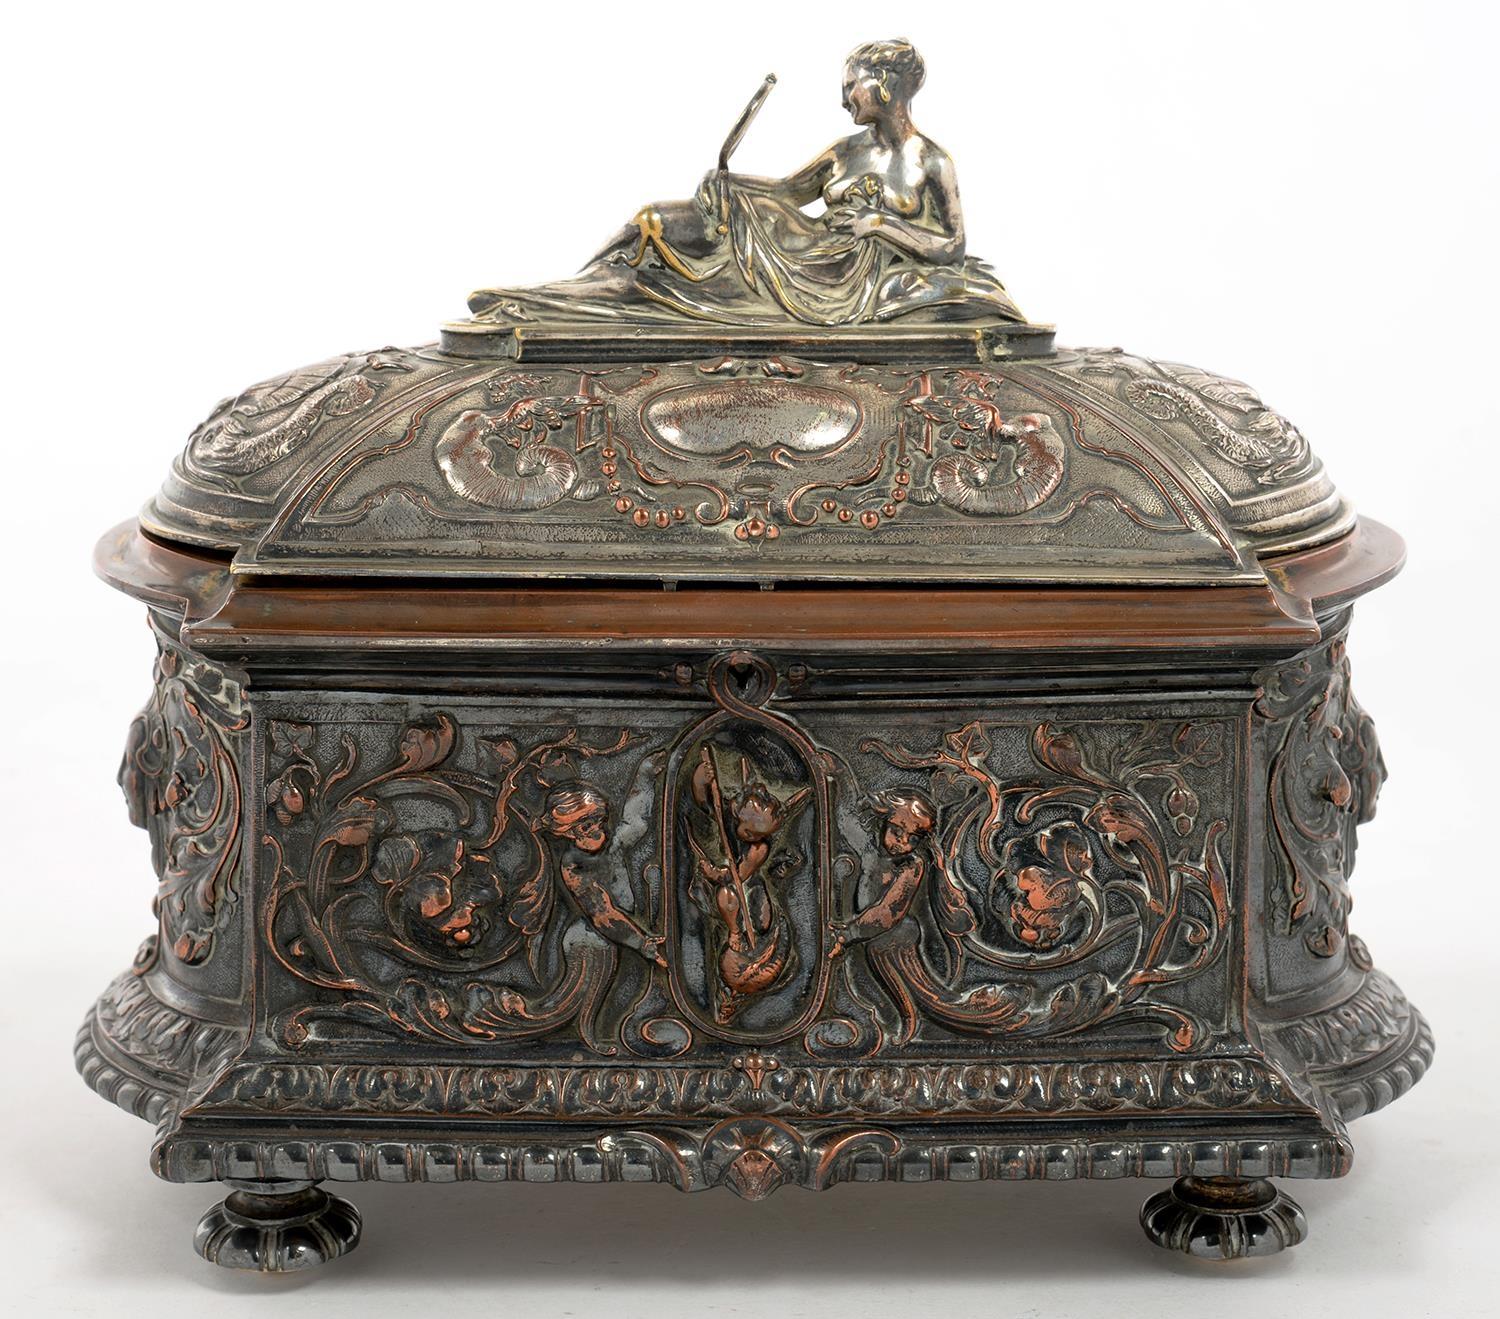 A VICTORIAN ELECTROPLATED COPPER ELECTROTYPE CASKET OF ORNATE BOW ENDED FORM, THE DOMED LID